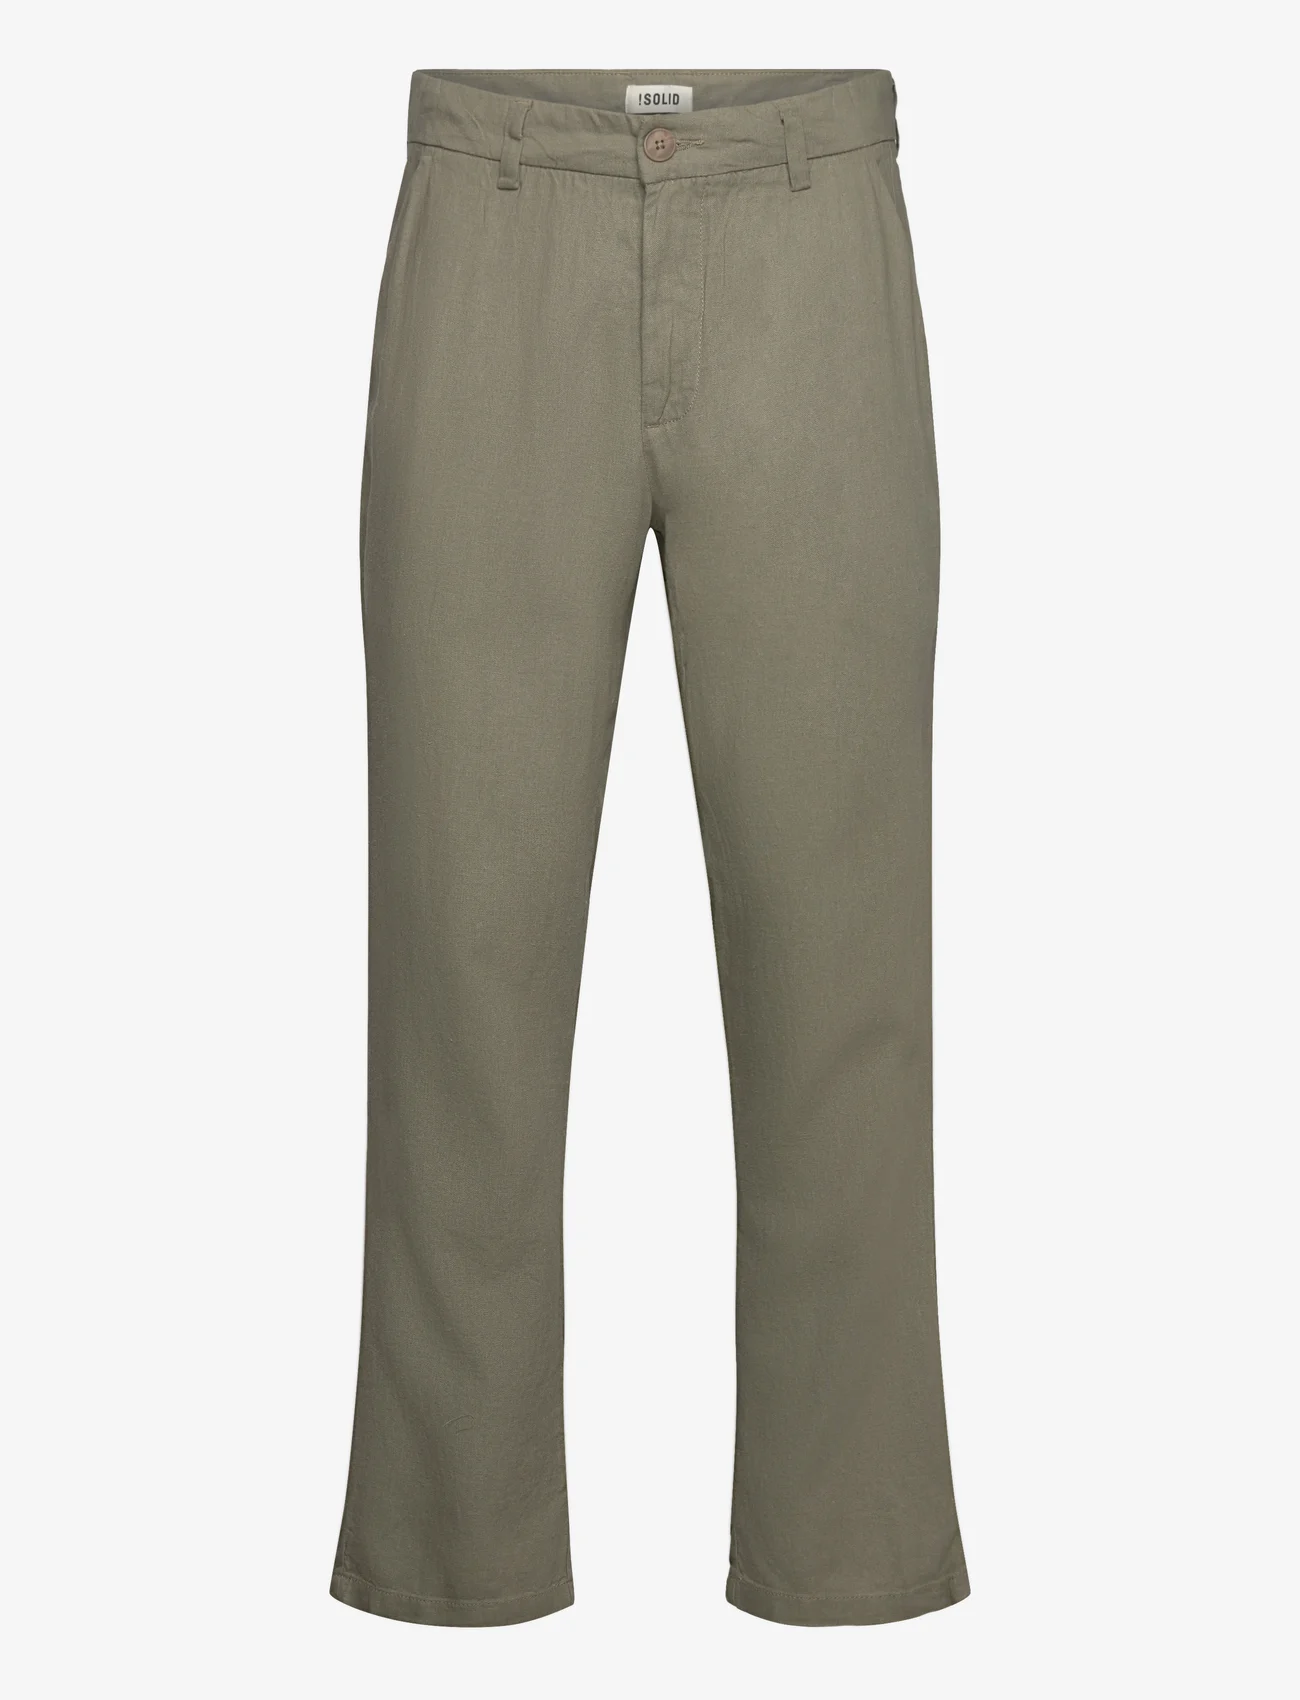 Solid - SDAllan Liam - linen trousers - vetiver - 0